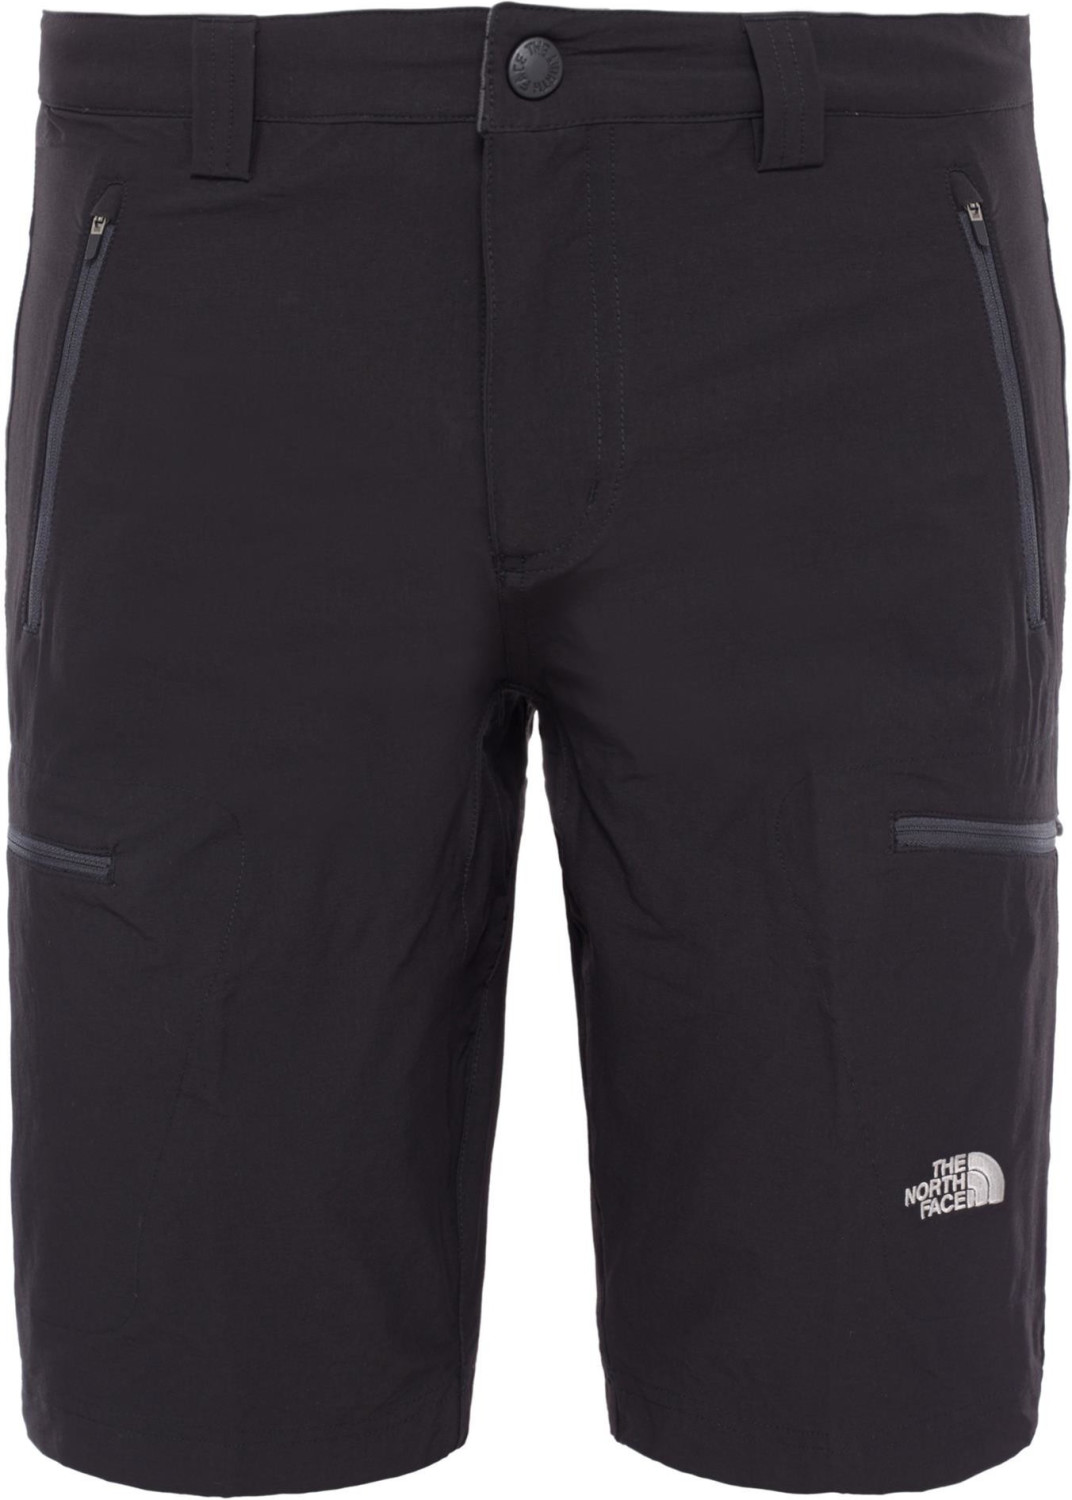 Buy The North Face Men's Exploration Shorts tnf black from £36.95 ...